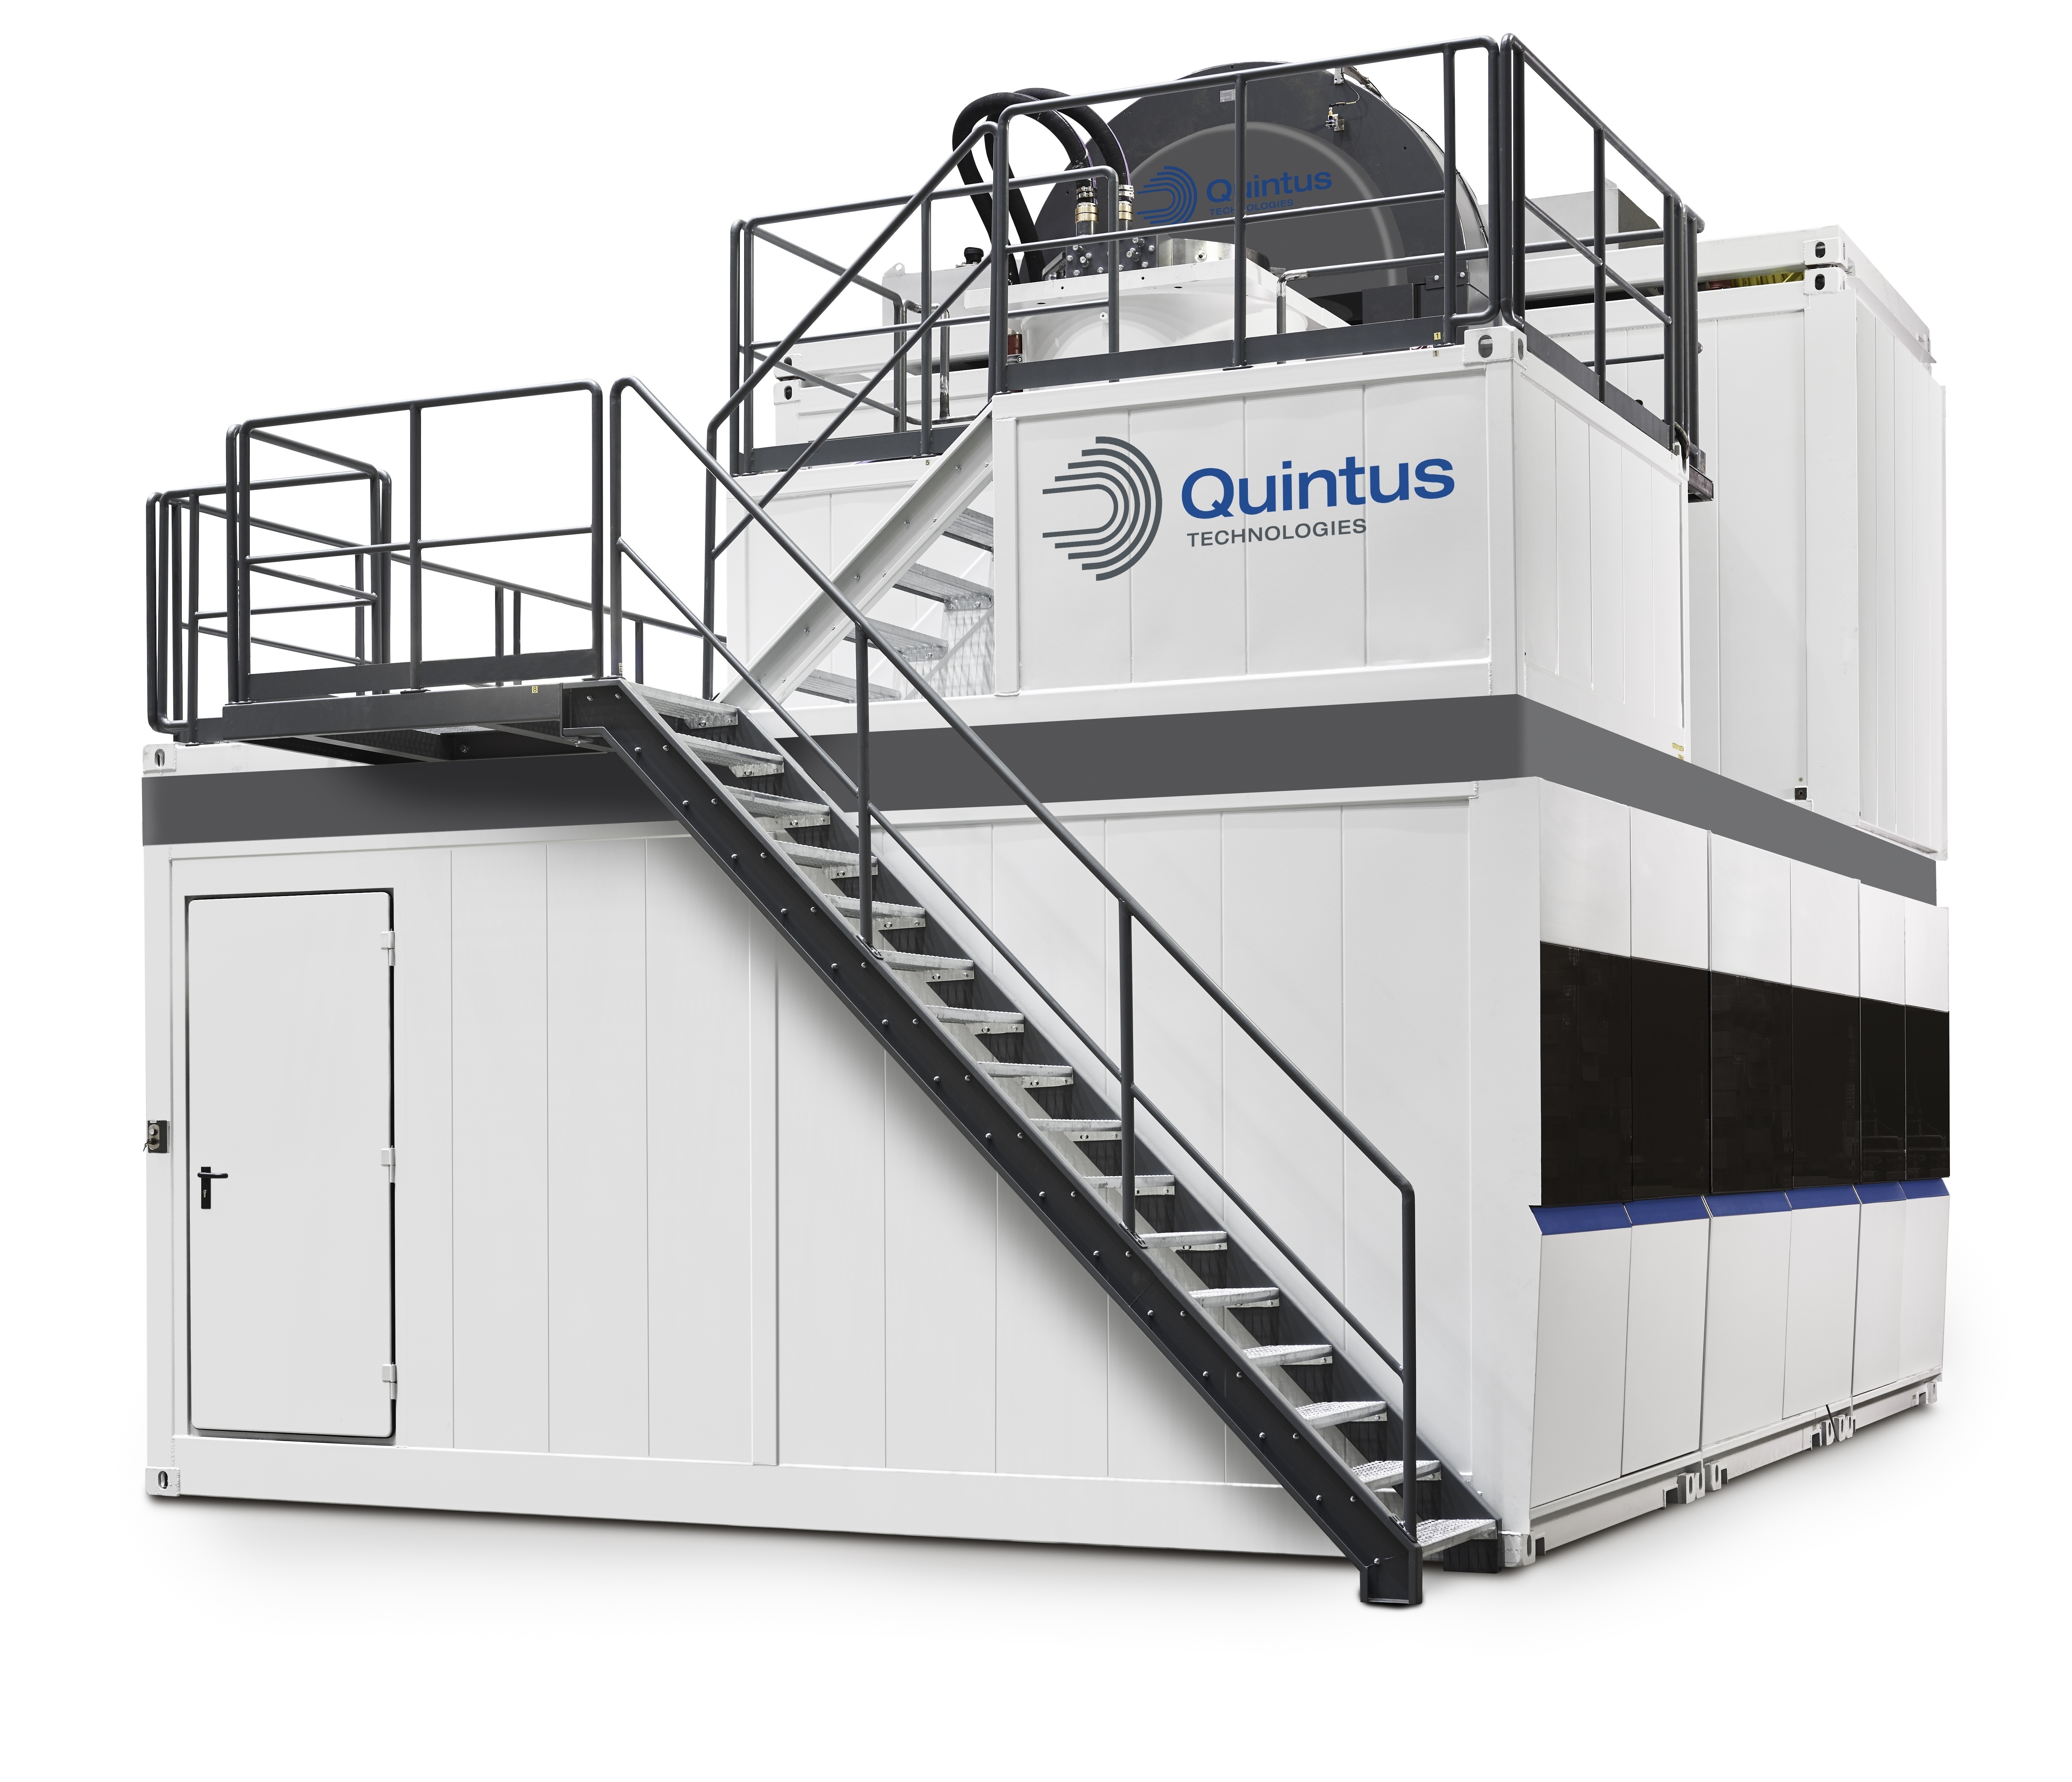 An additional Quintus Hot Isostatic Press (HIP) will be installed in Stack Metallurgical Group’s facility in the US. (Photo courtesy of Quintus Technologies.)